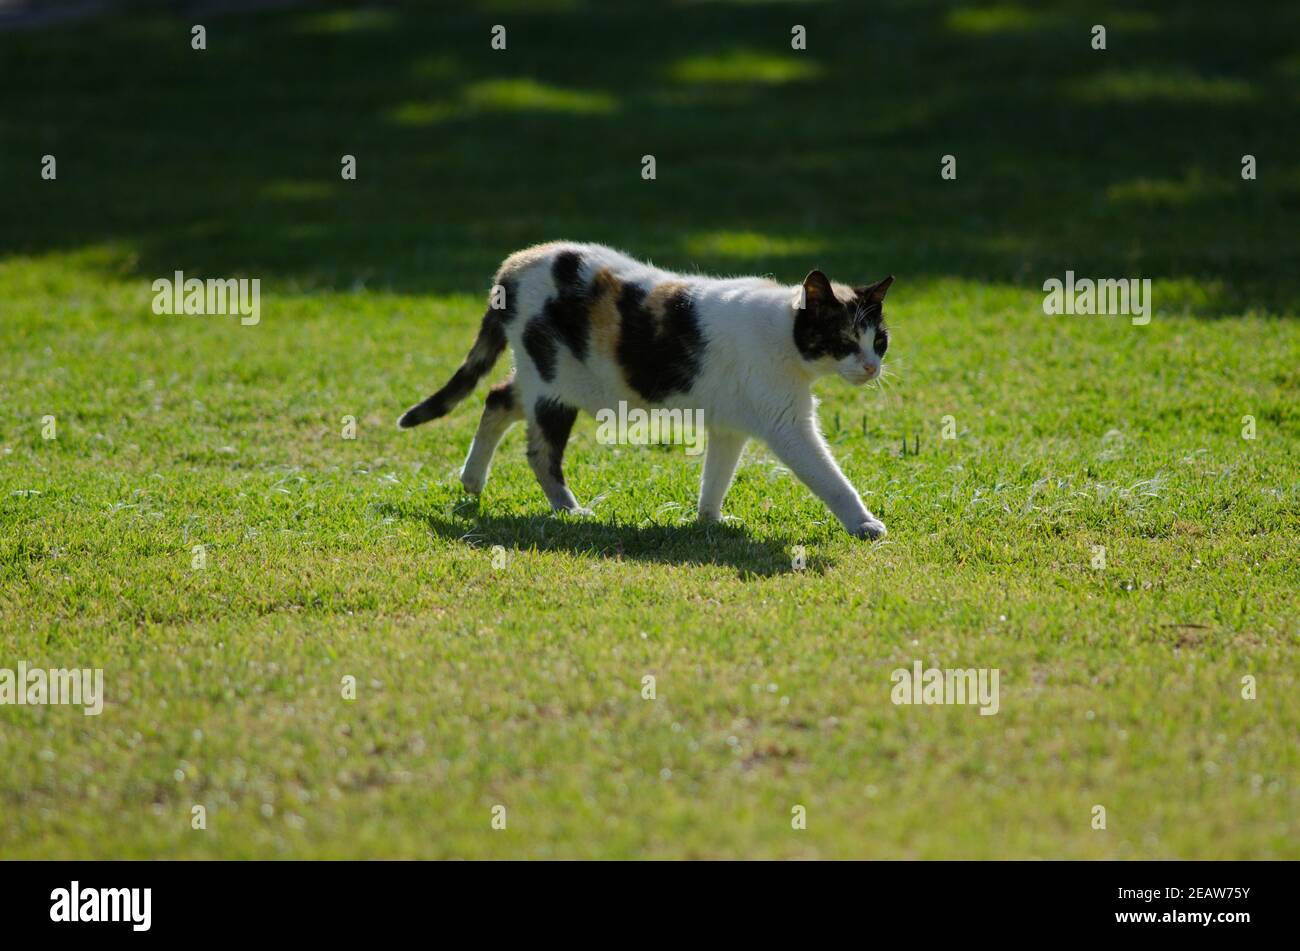 Cat walking on the grass of a garden. Stock Photo